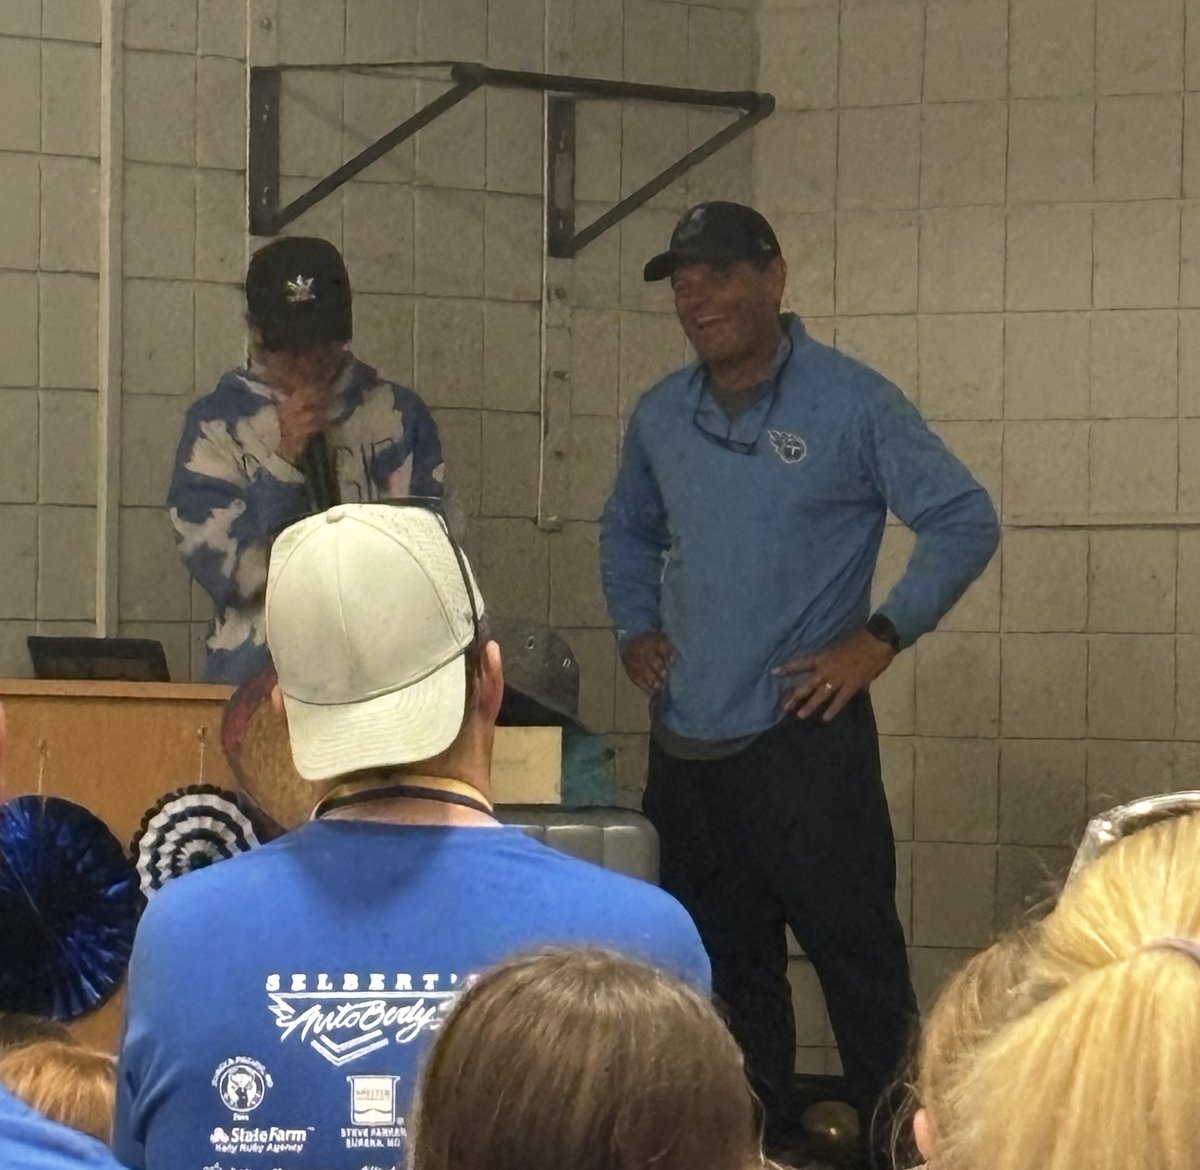 Today at the Geggie Elementary 5K Coach Pat Grimshaw was honored for his upcoming retirement from teaching. An absolute legend in our community who’s impacted so many lives. We thank you Pat for all you’ve done, you’re one of the best in our school community! 👏👏